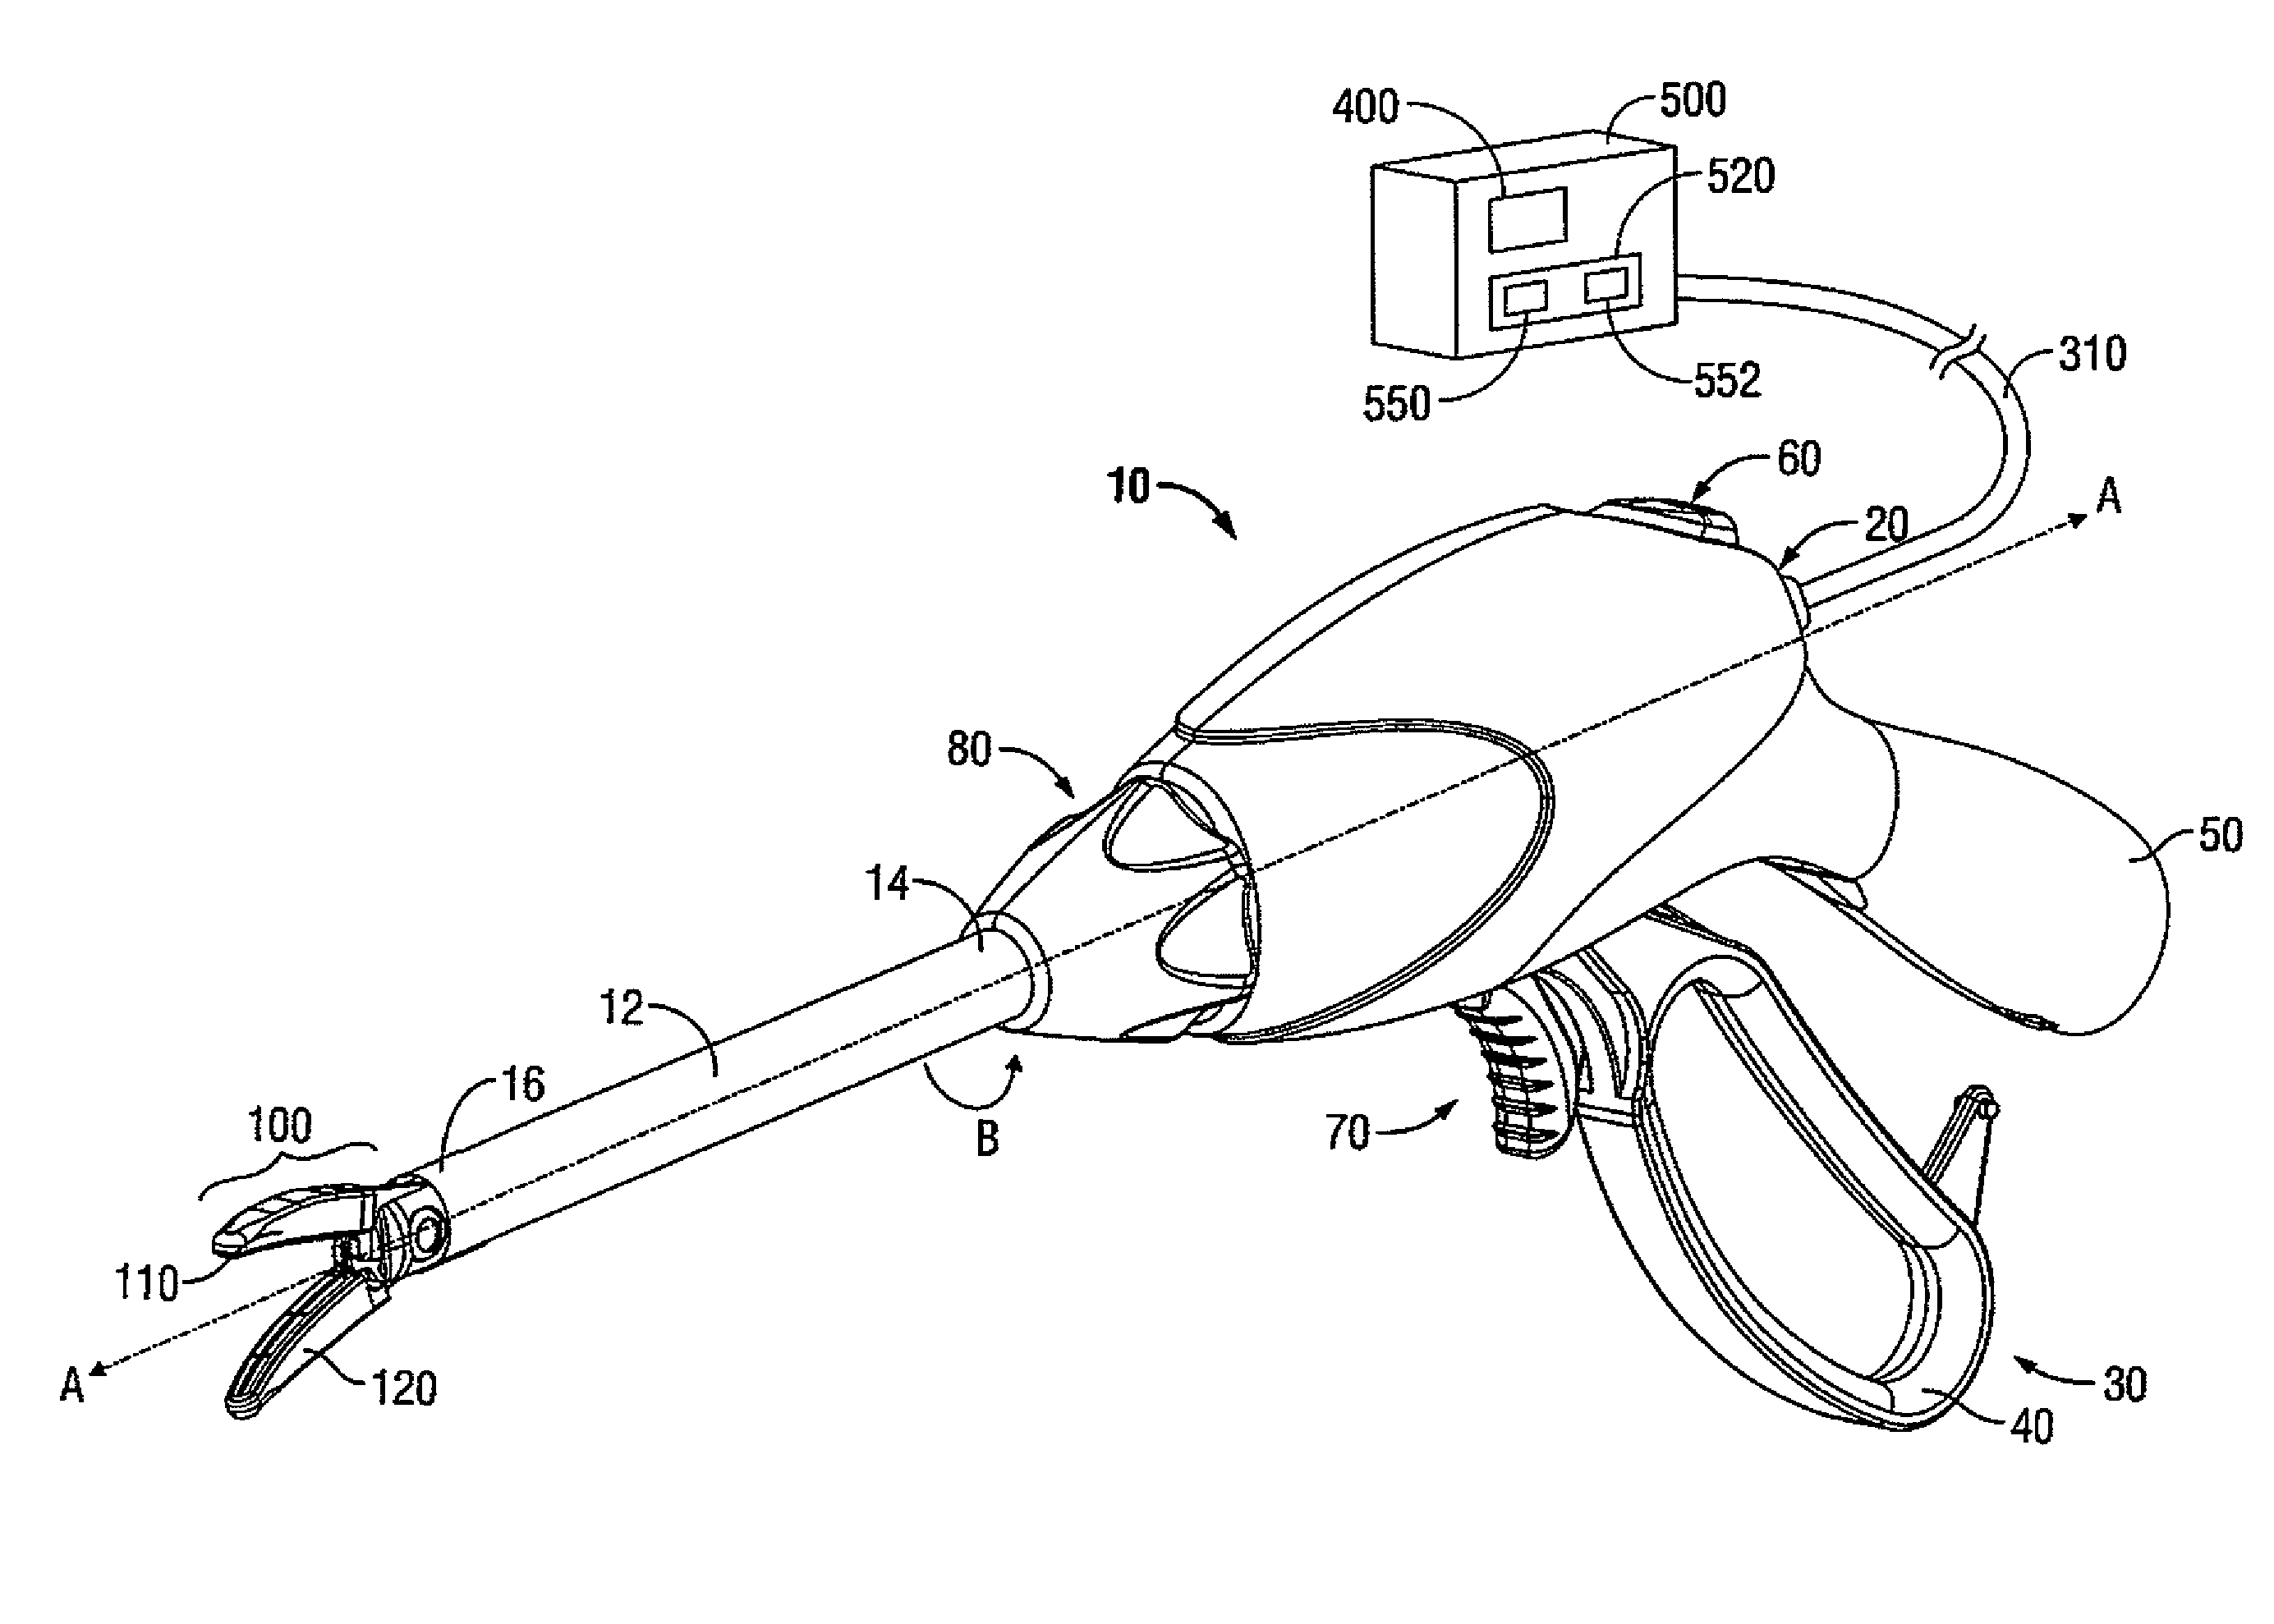 Apparatus, system and method for monitoring tissue during an electrosurgical procedure